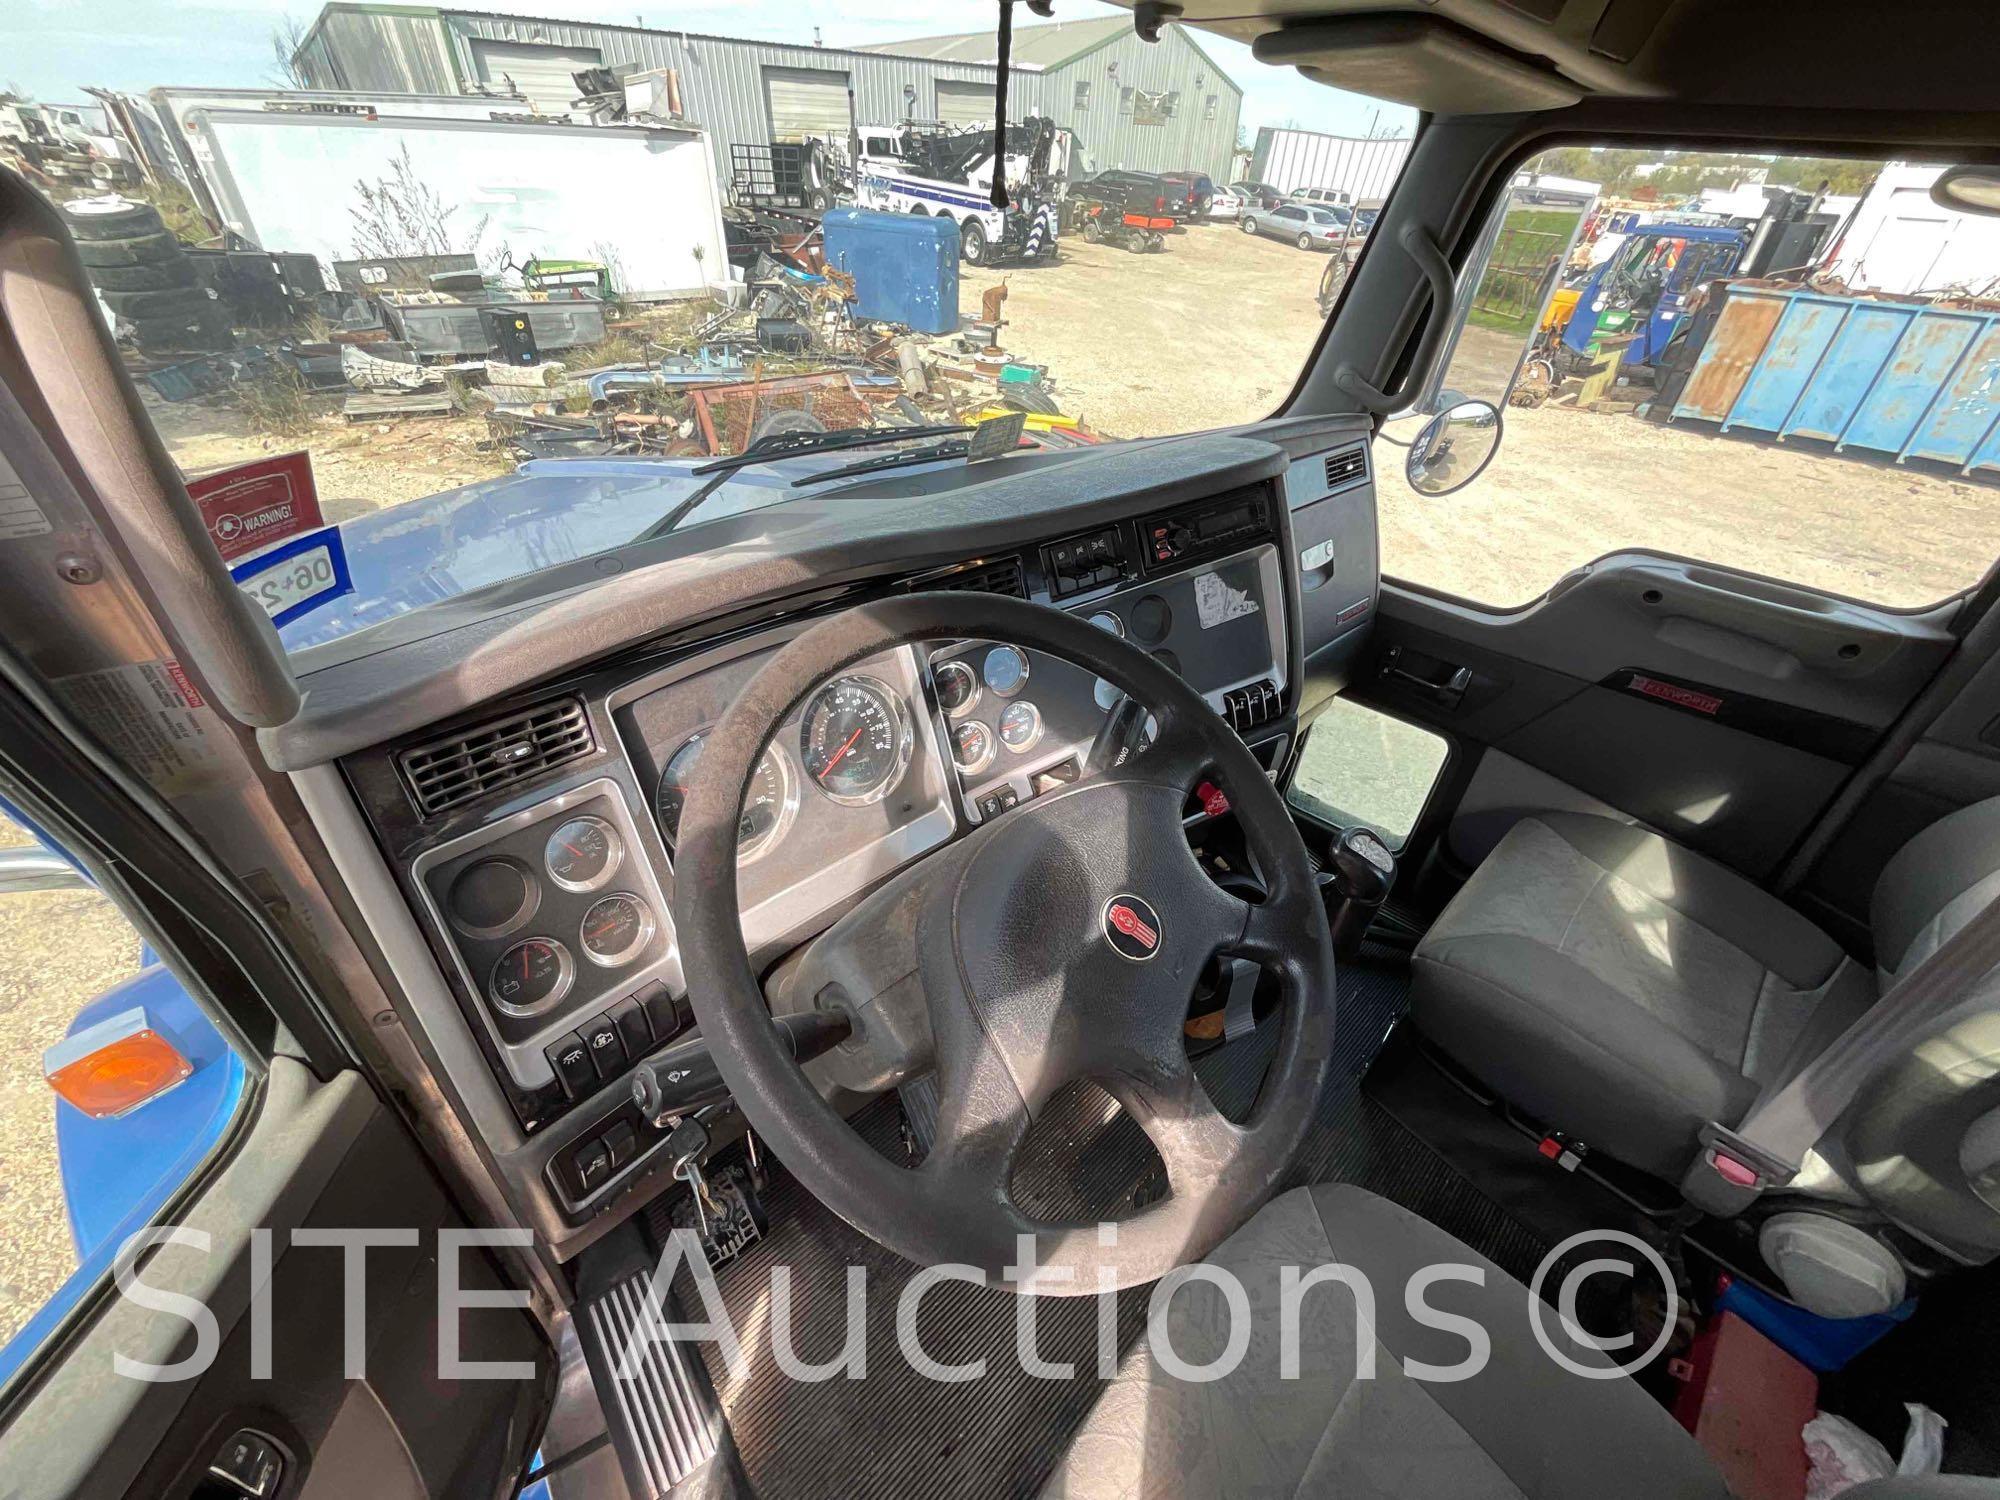 2008 Kenworth T800 T/A Daycab Truck Tractor